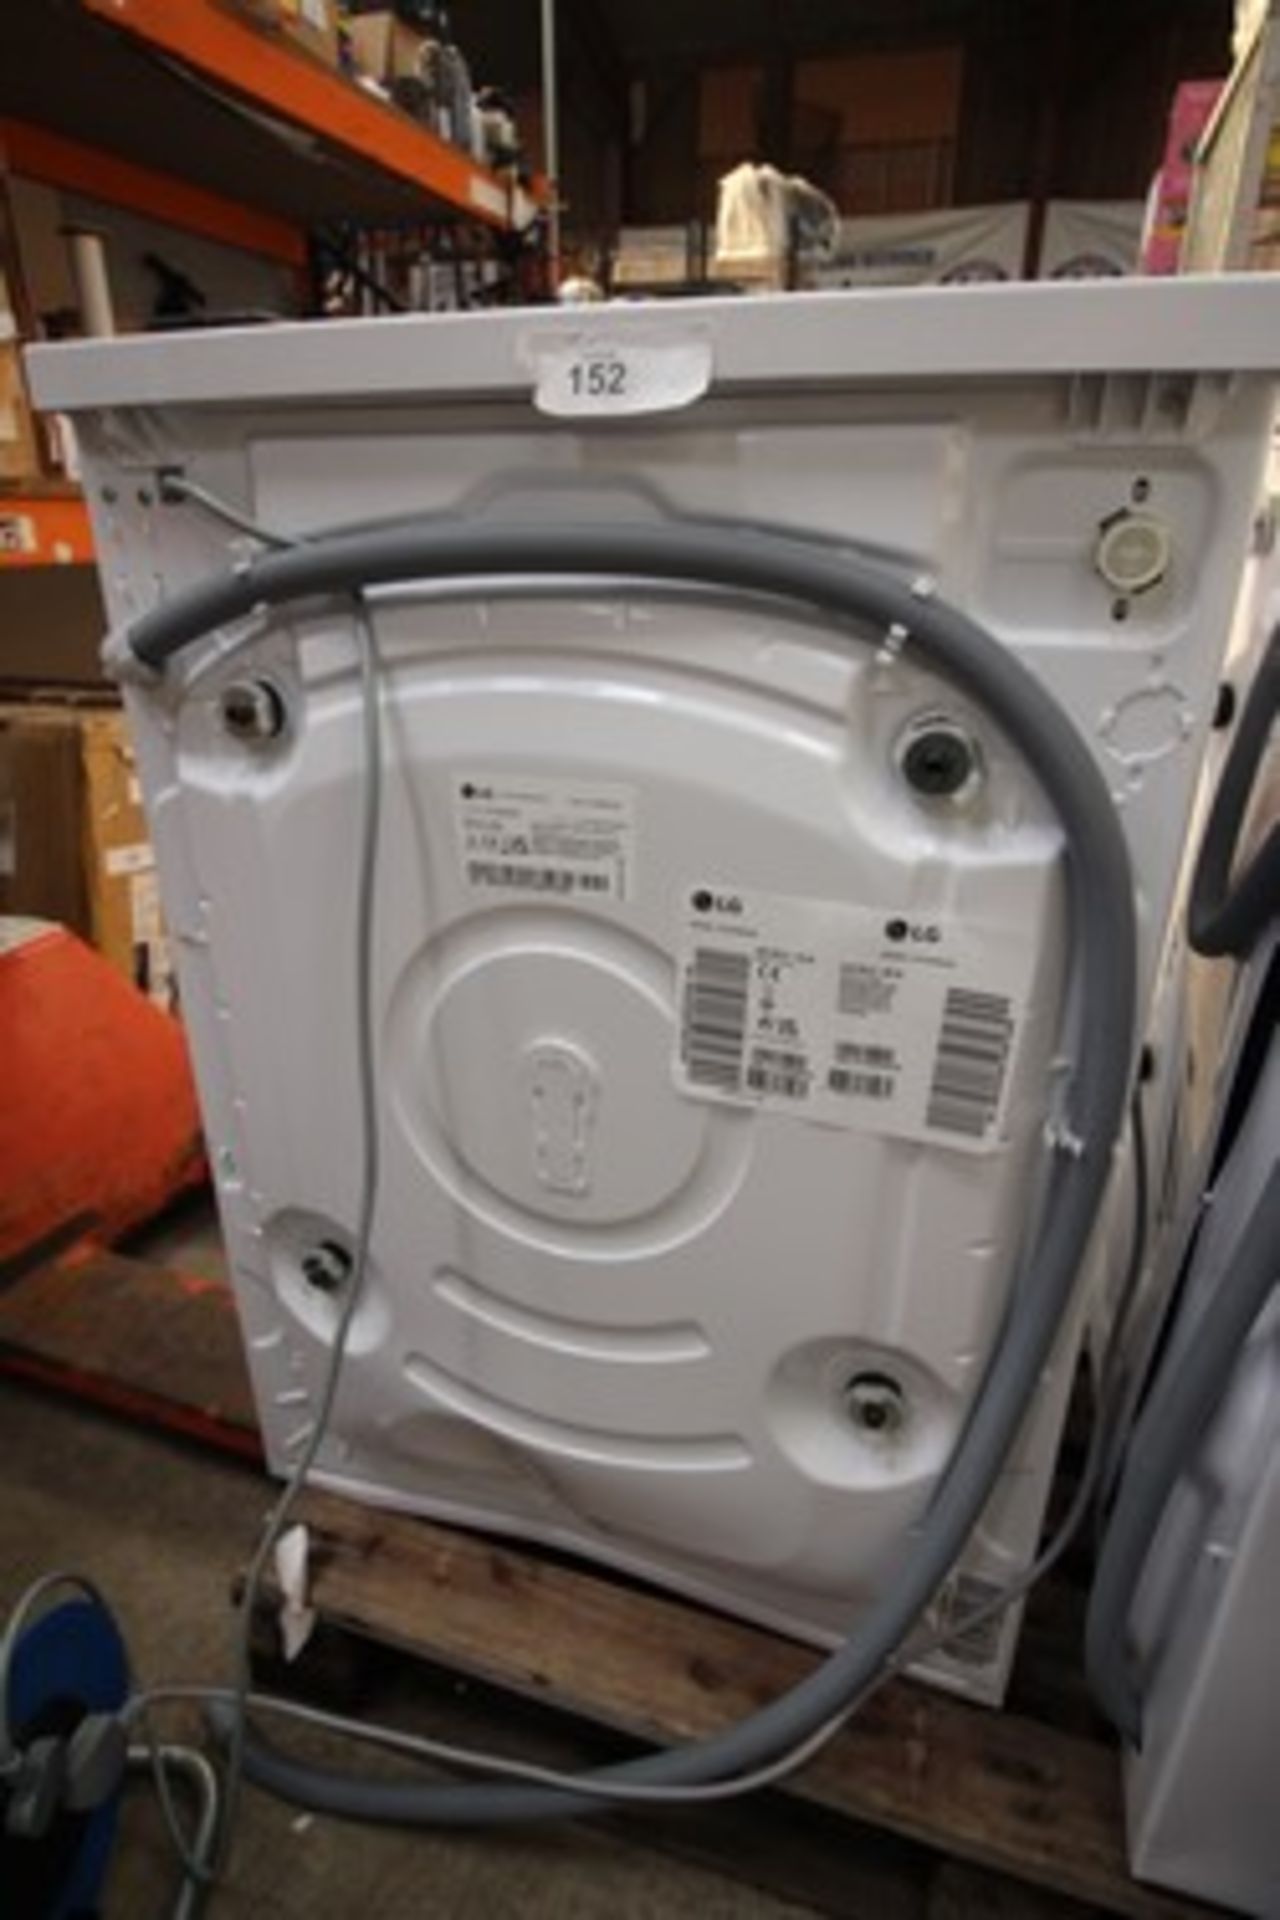 1 x LG 9kg washing machine, Model F4T209WSE, powers on ok but not fully tested - New (ES9) - Image 3 of 4